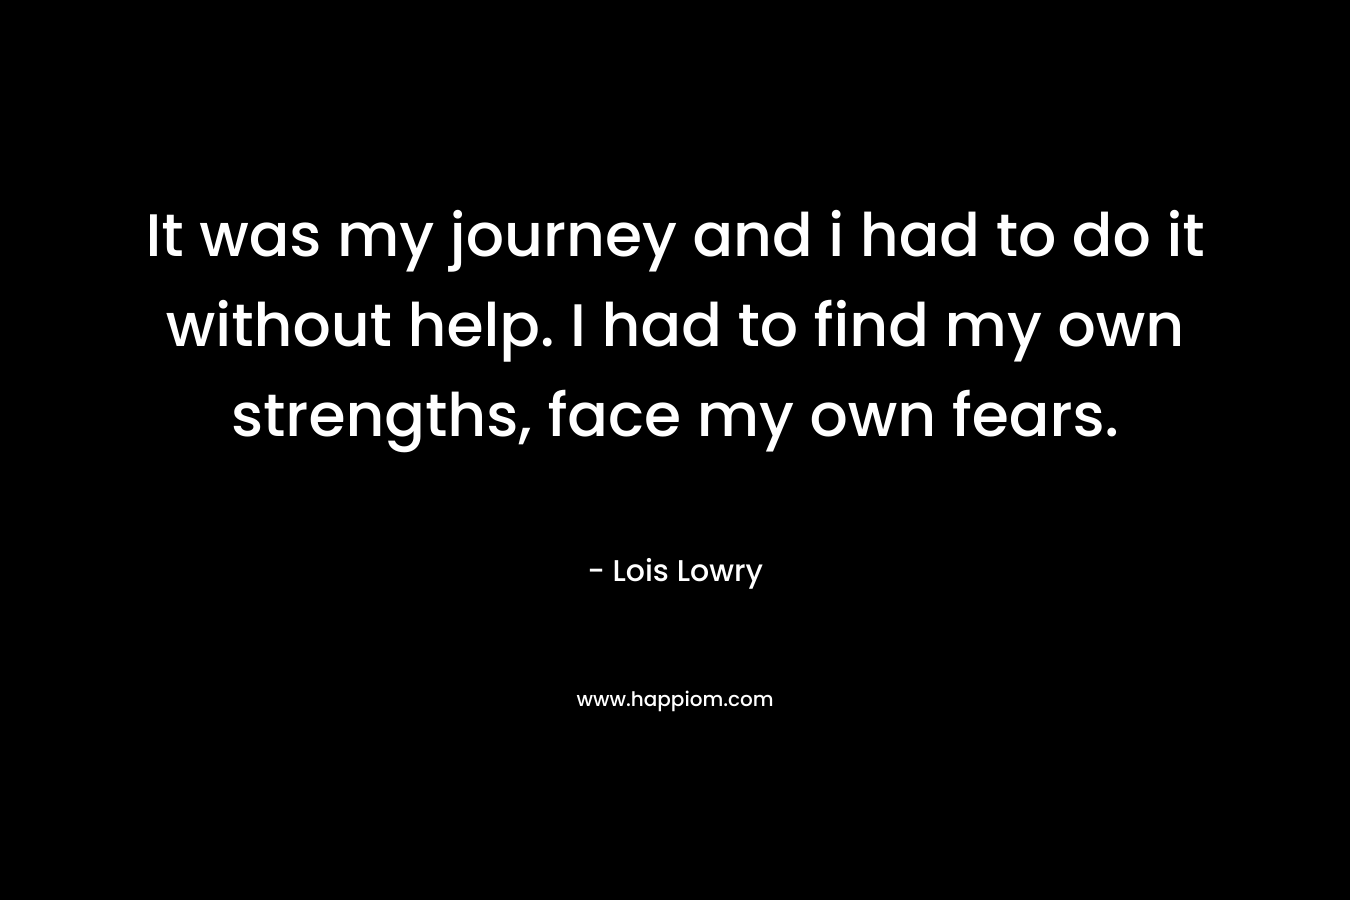 It was my journey and i had to do it without help. I had to find my own strengths, face my own fears.